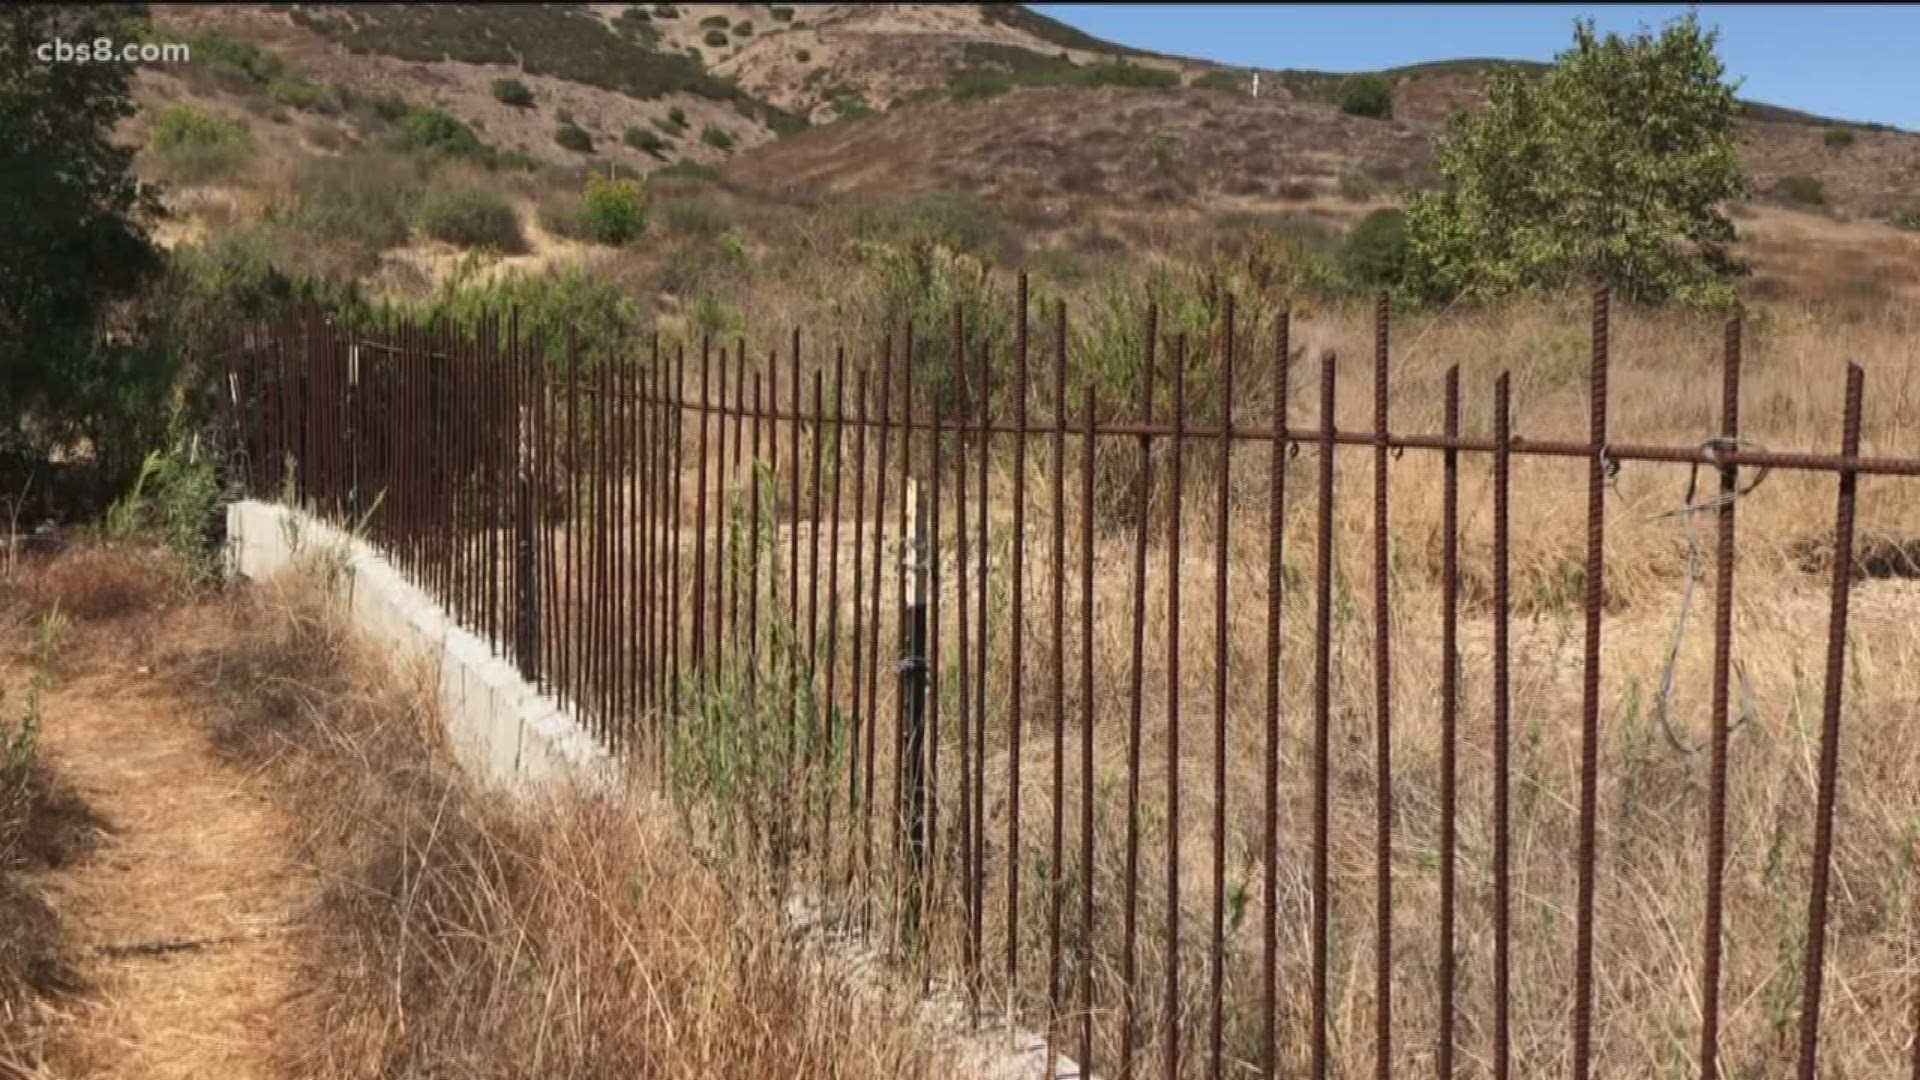 A man has blocked access to a popular Mission Trails path because it runs through his property and inaction from the City of San Diego.